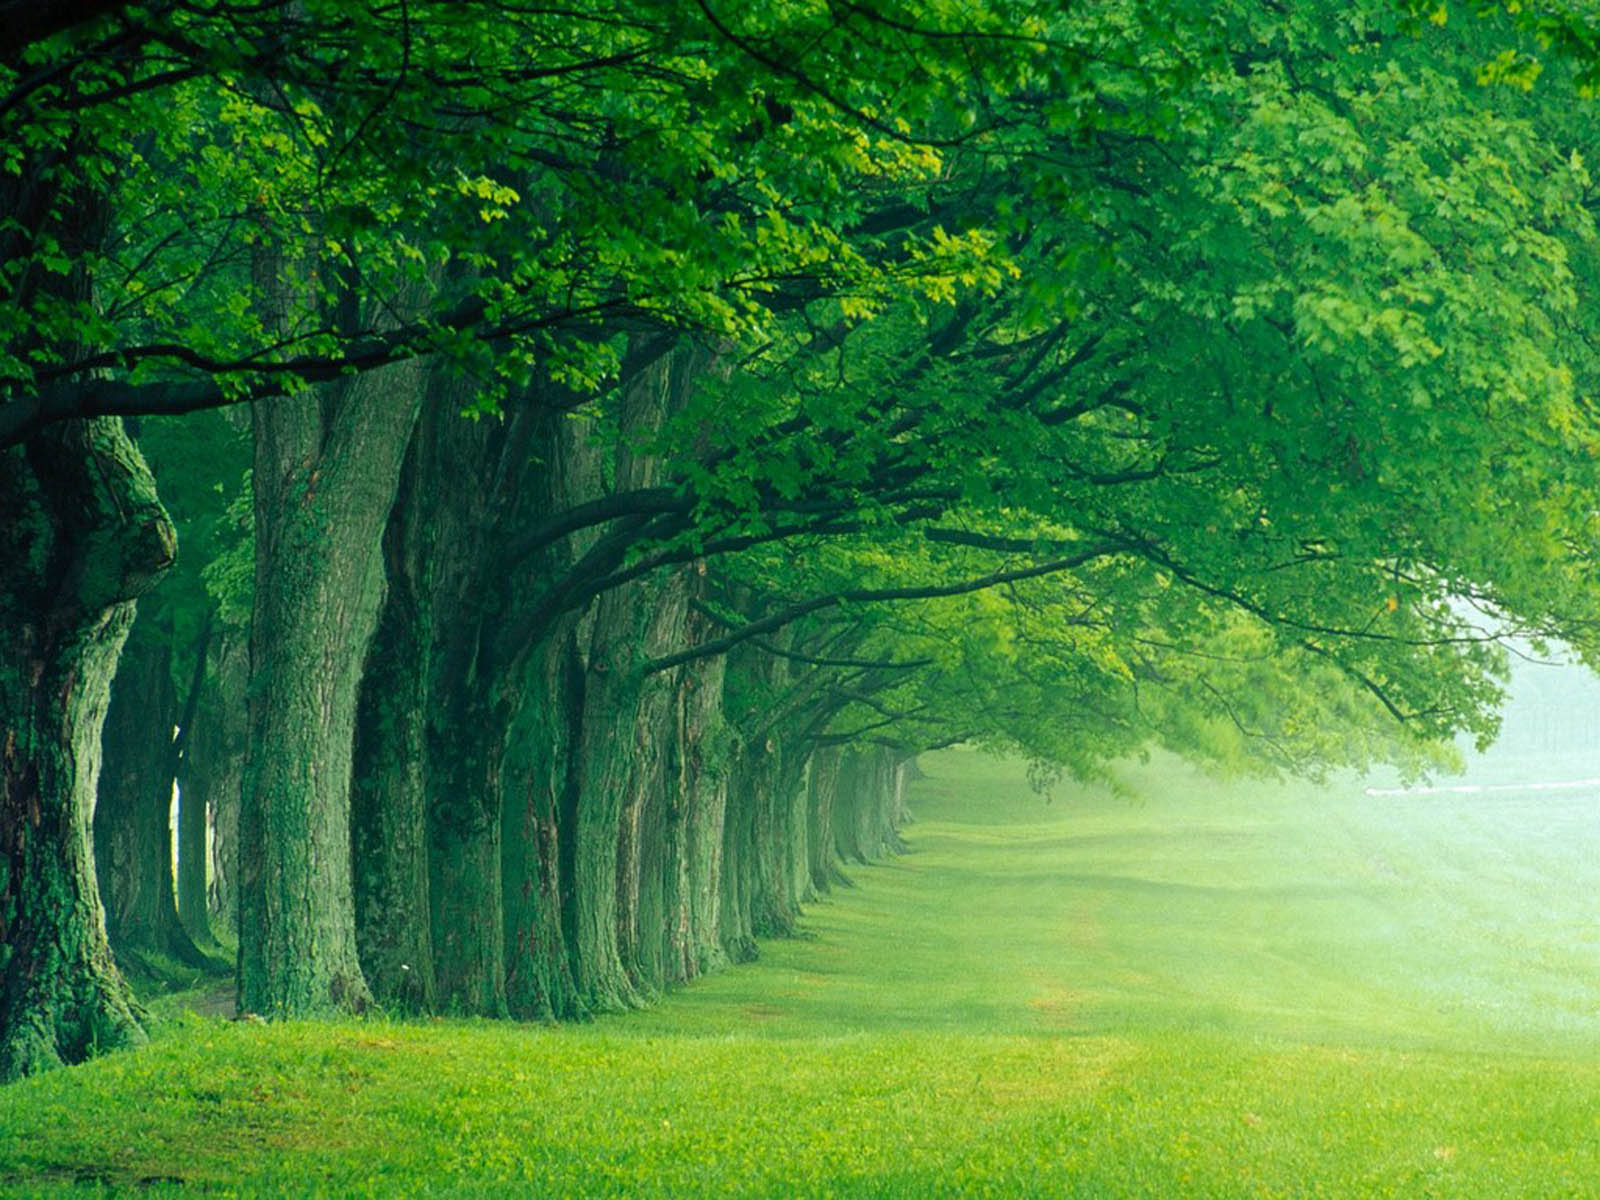  Trees Wallpapers Images Photos Pictures and Backgrounds for free